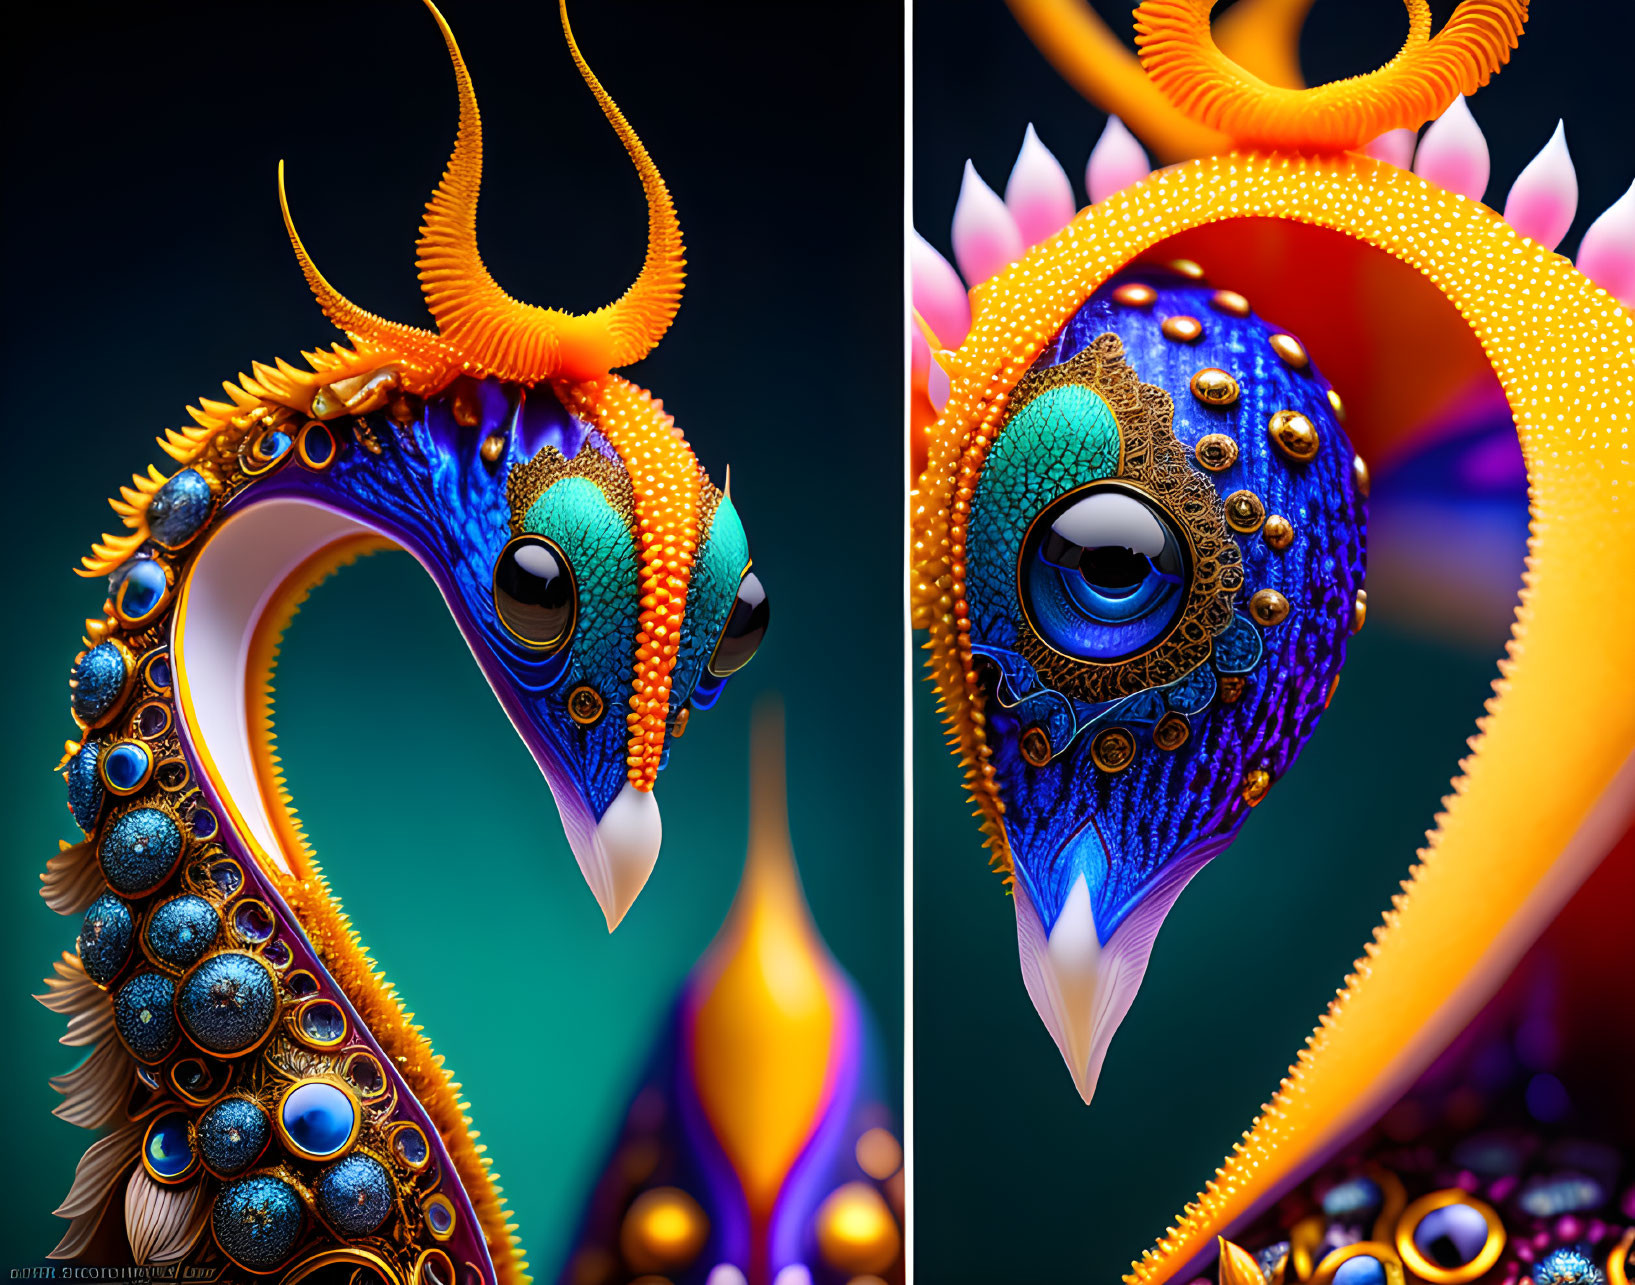 Colorful digital artwork of a stylized dragon-like creature with ornate feathers and expressive eyes